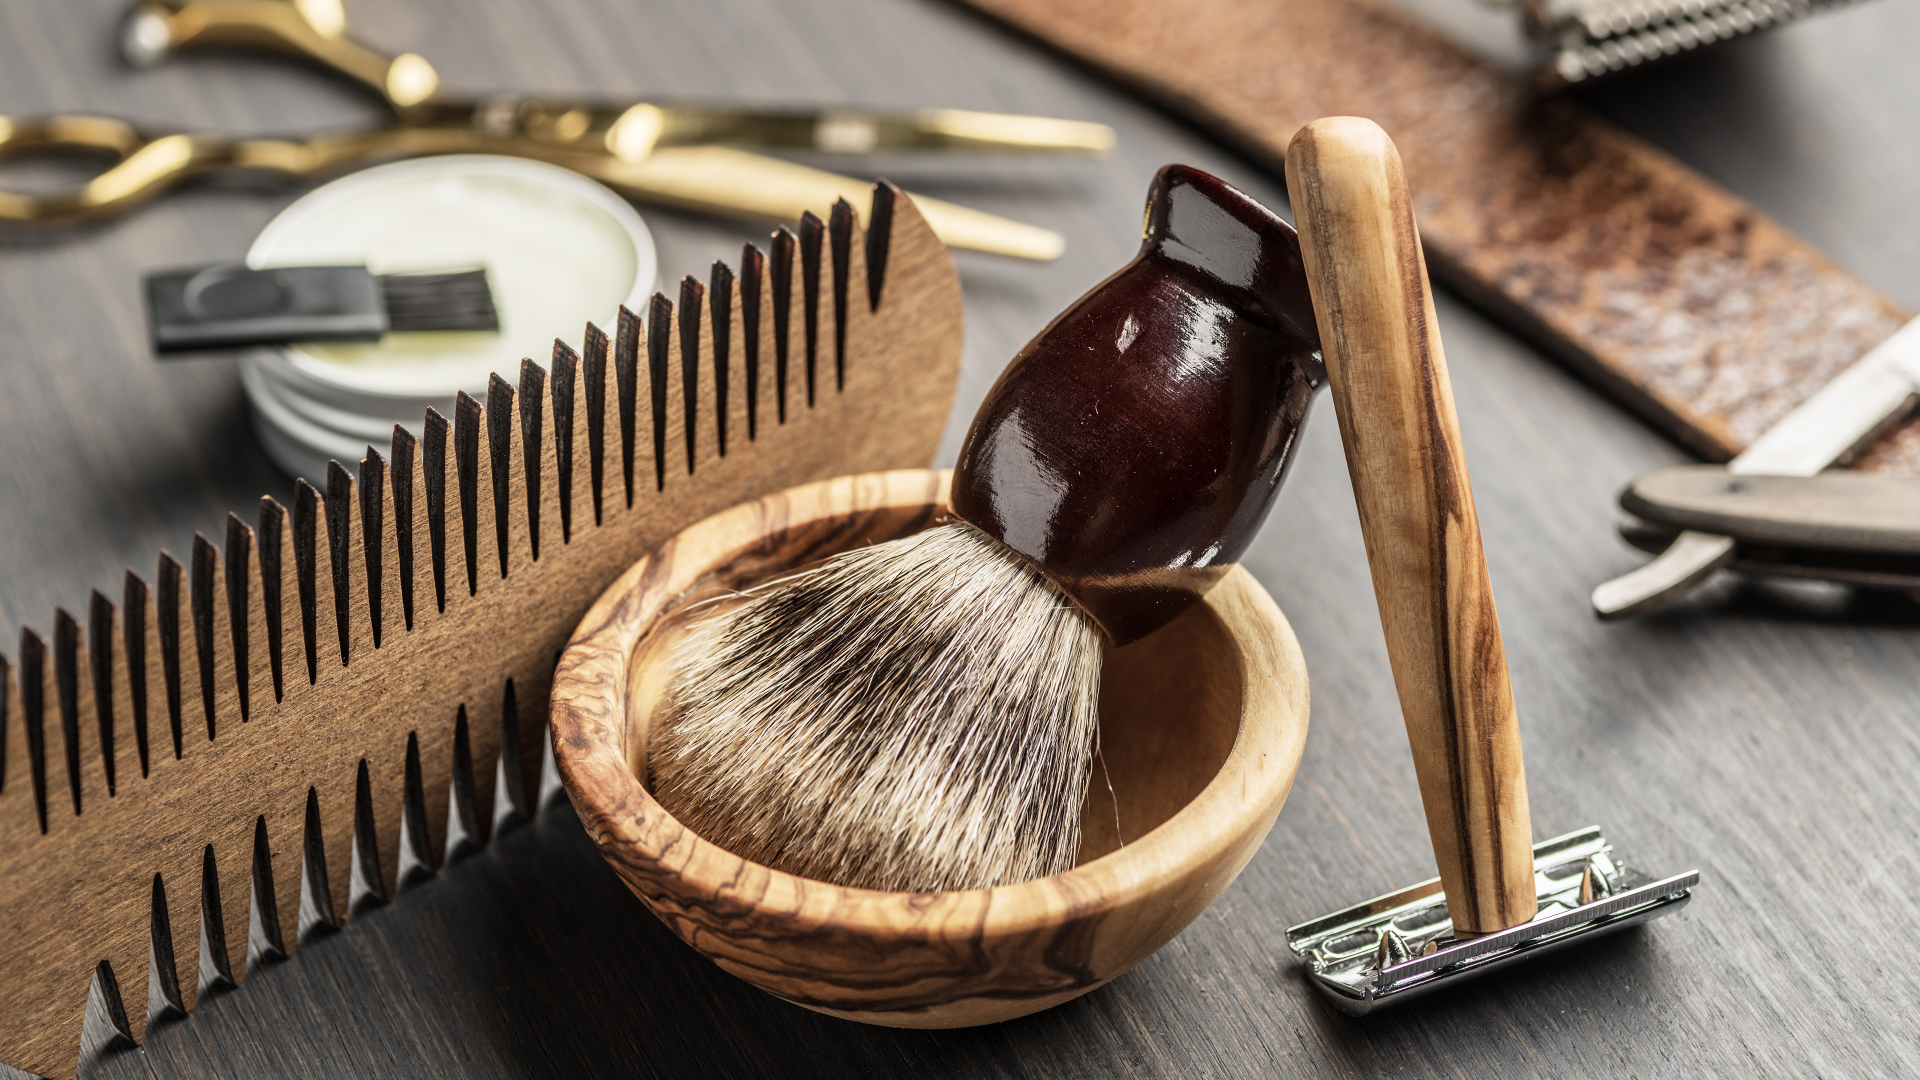 the typical barber tools